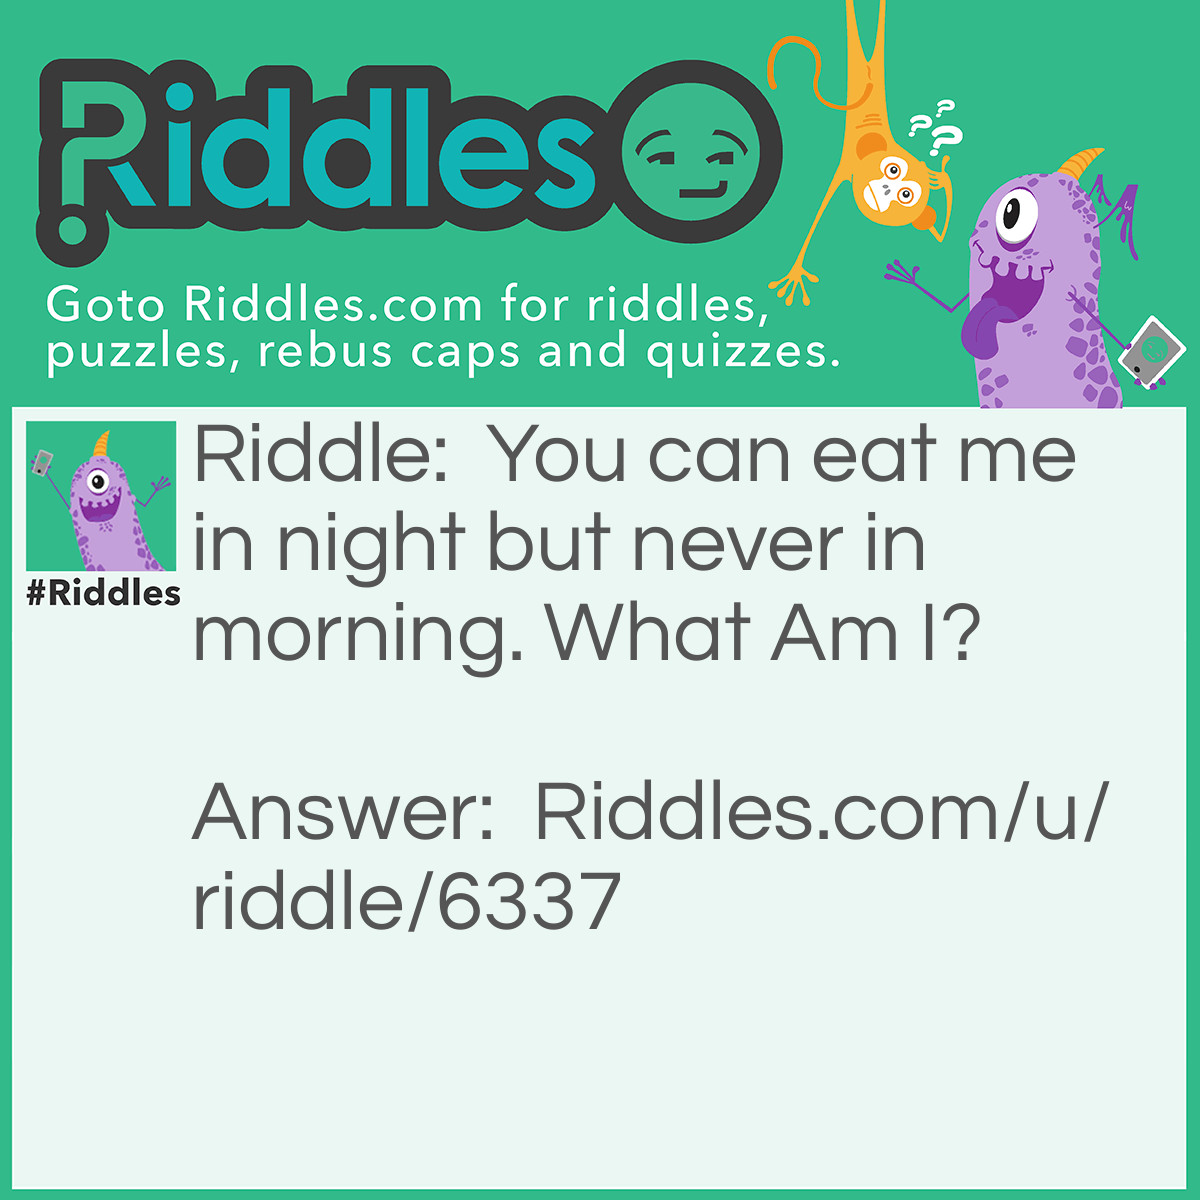 Riddle: You can eat me in night but never in morning. What Am I? Answer: Dinner.